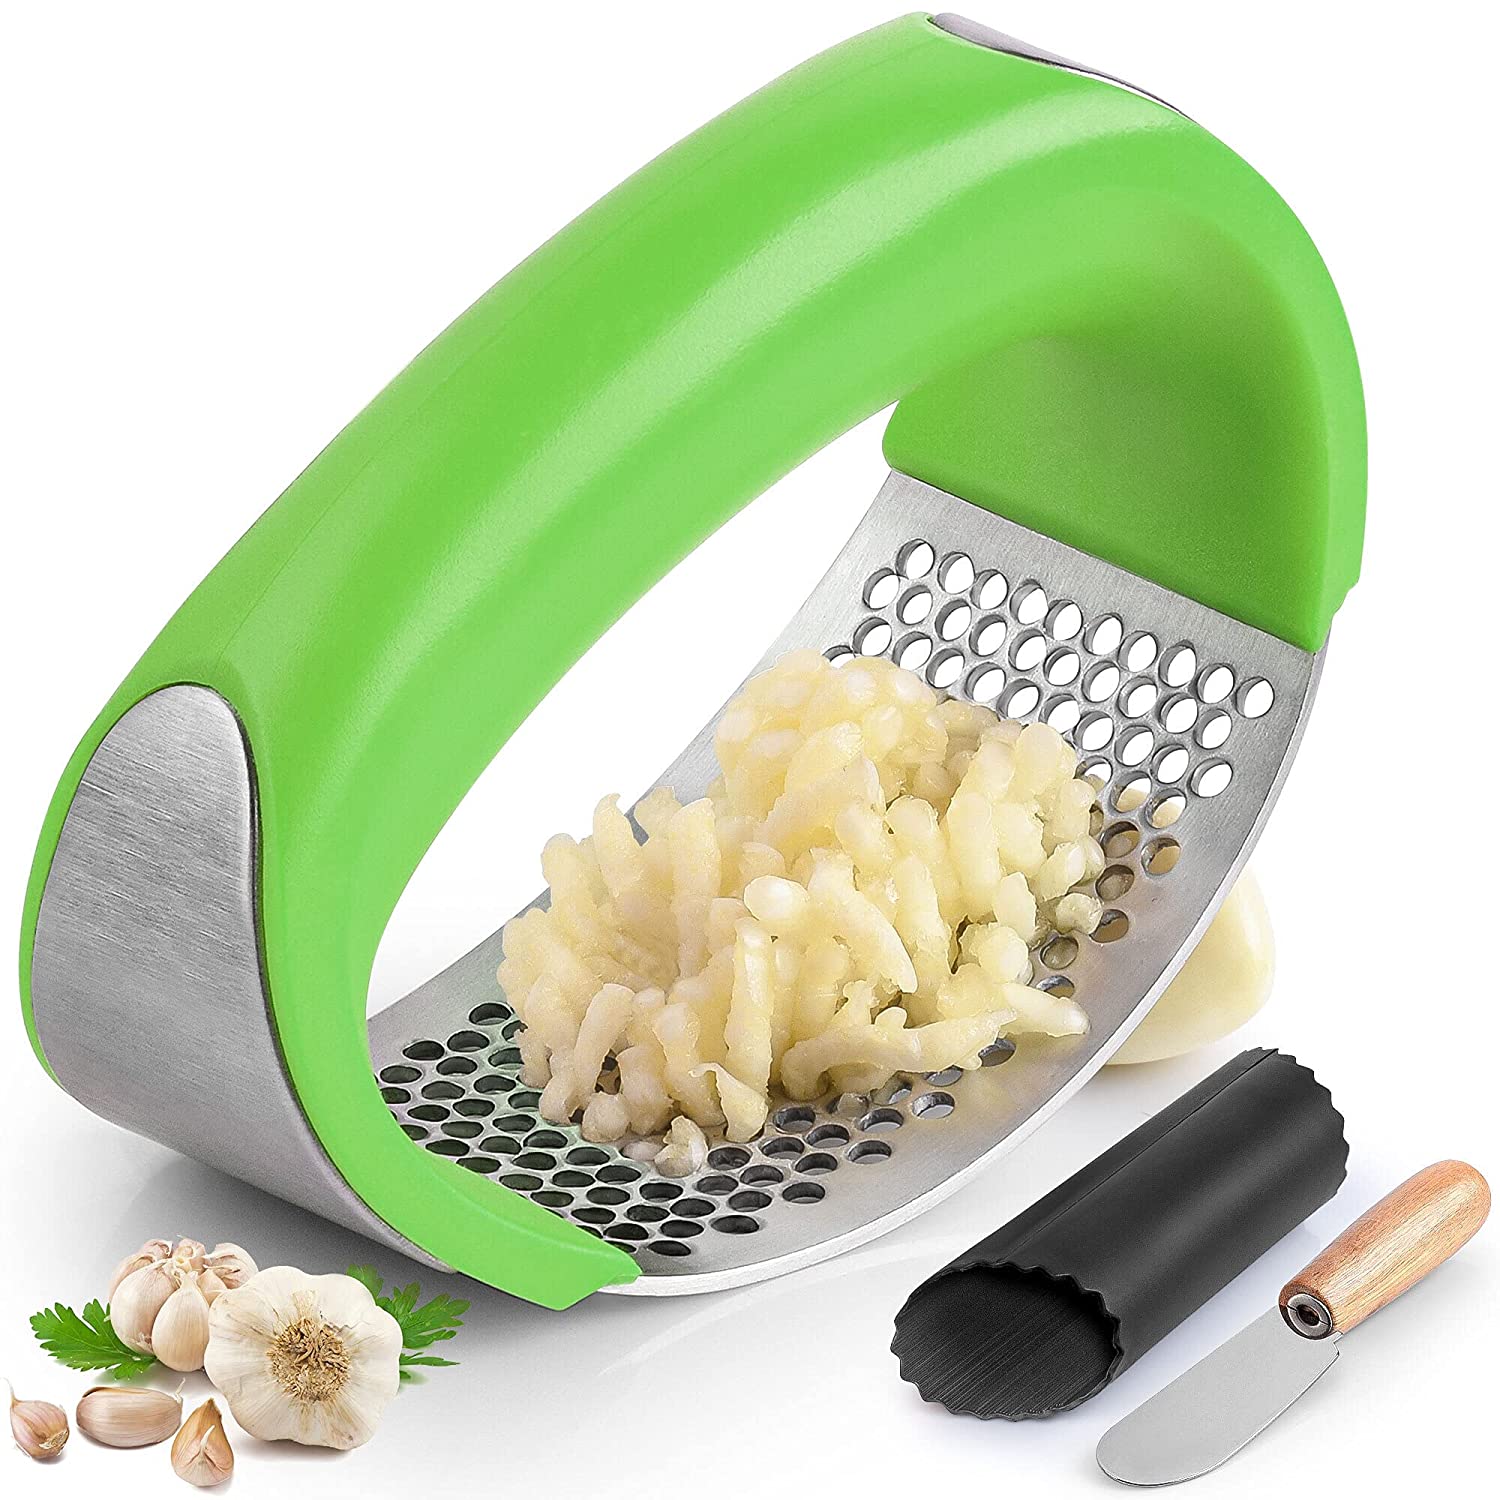 Stainless Steel Garlic Press with Comfortable Grip in green color